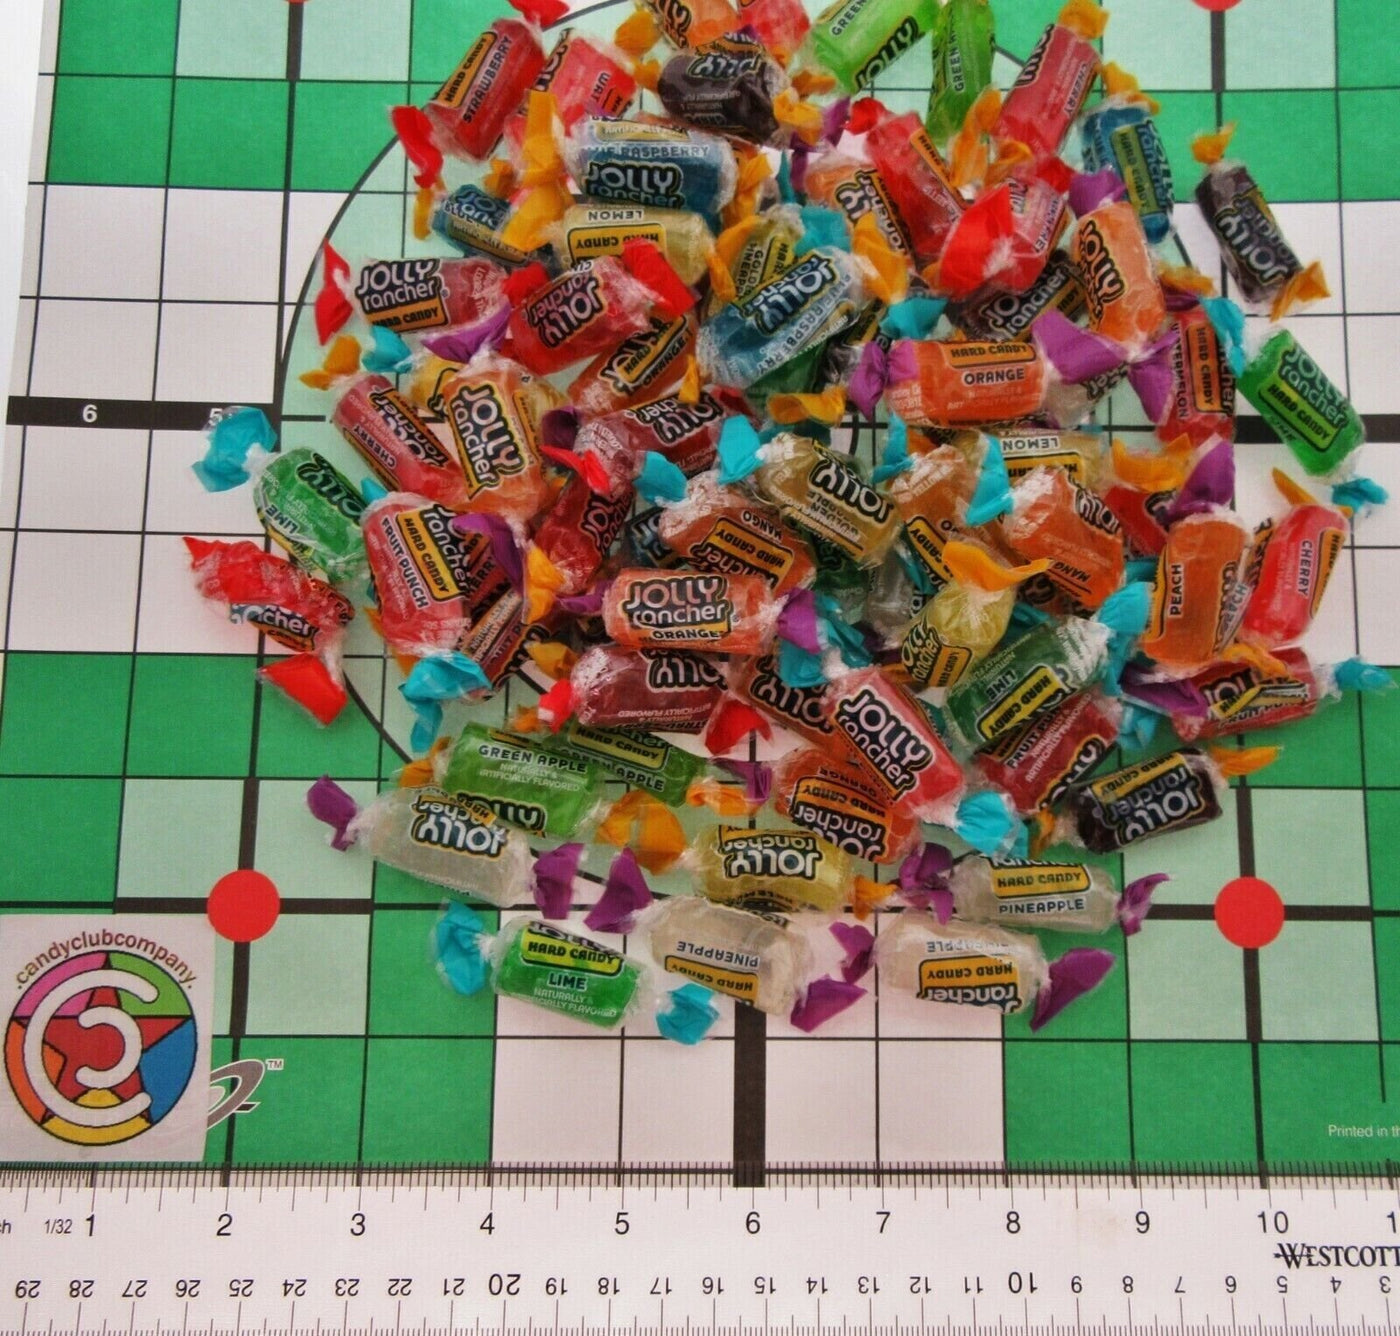 Jolly Rancher 14 Flavor Mix Hard Candy American Favorite One Pound (16oz) sweets